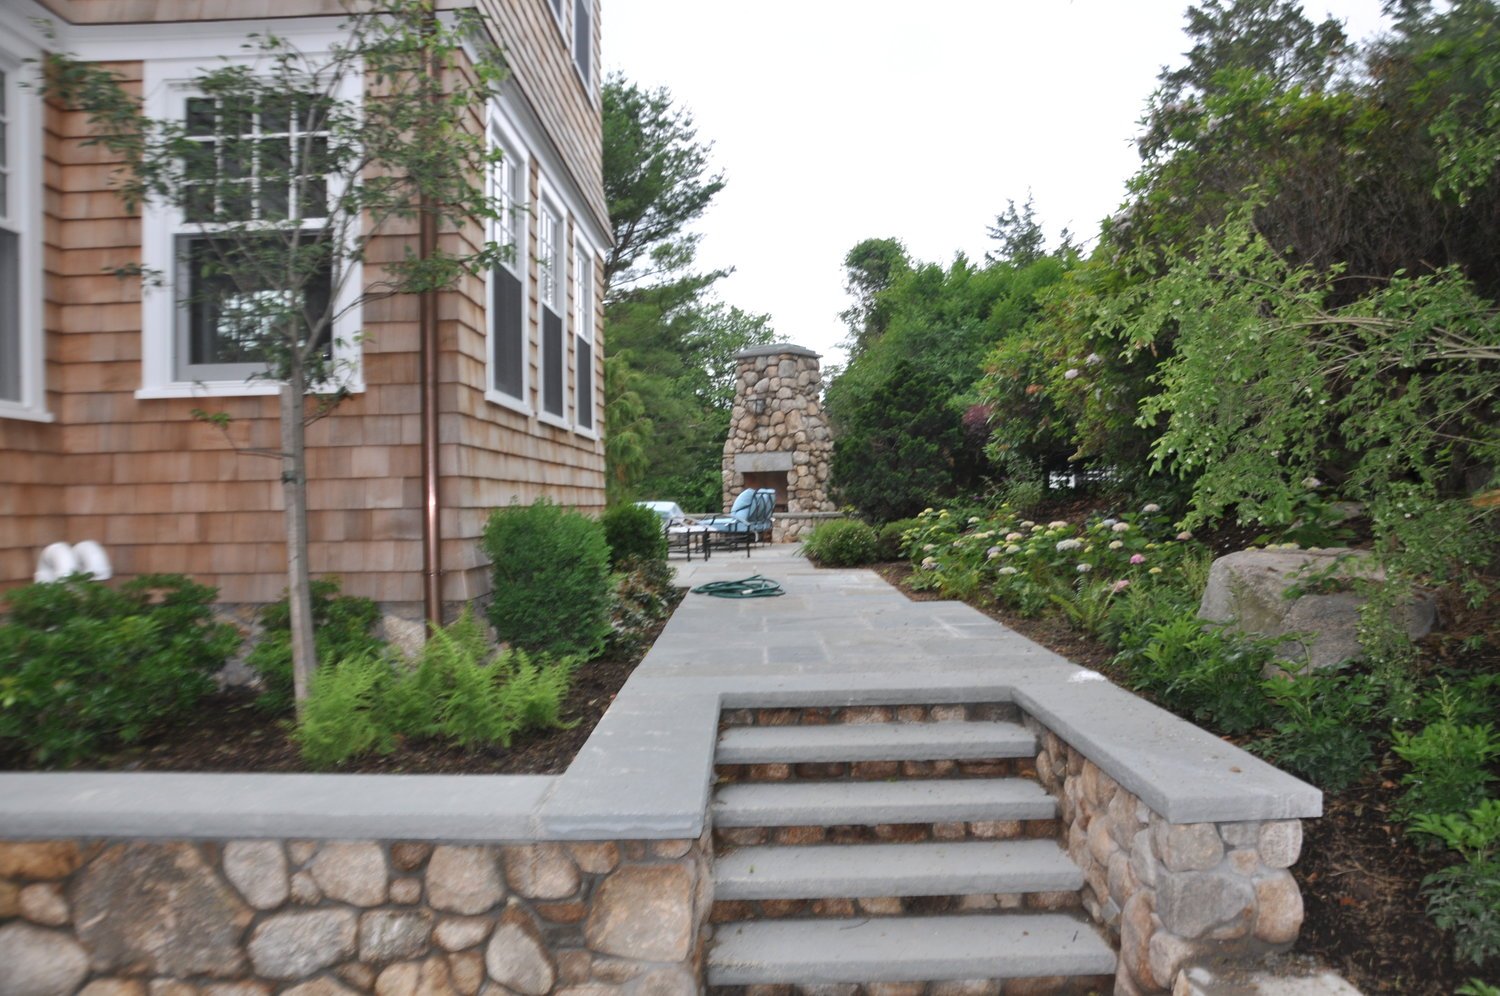 Landscaping services near me in Newport, Rhode Island